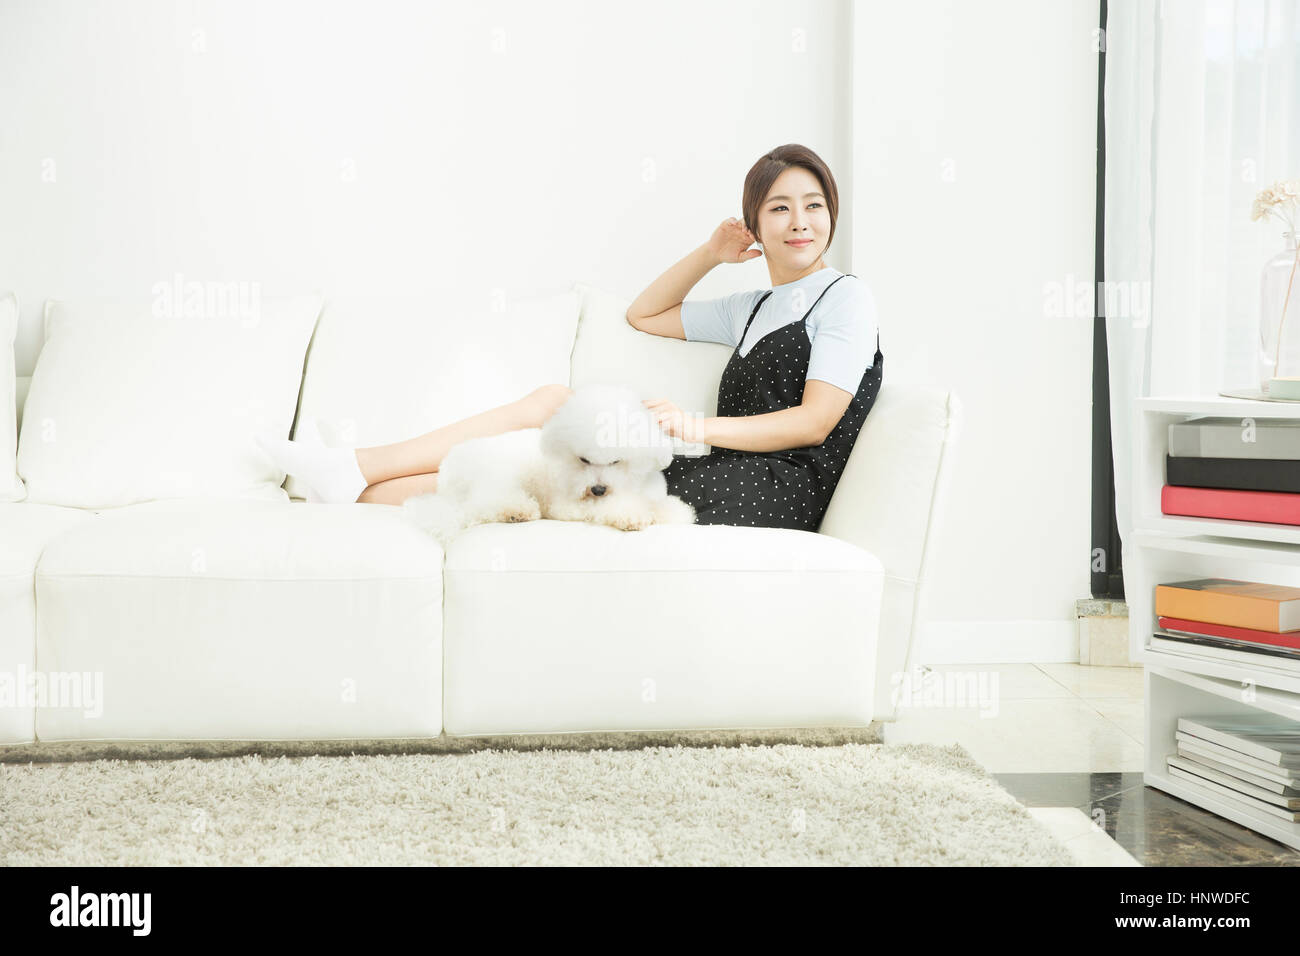 Woman with pet dog Stock Photo